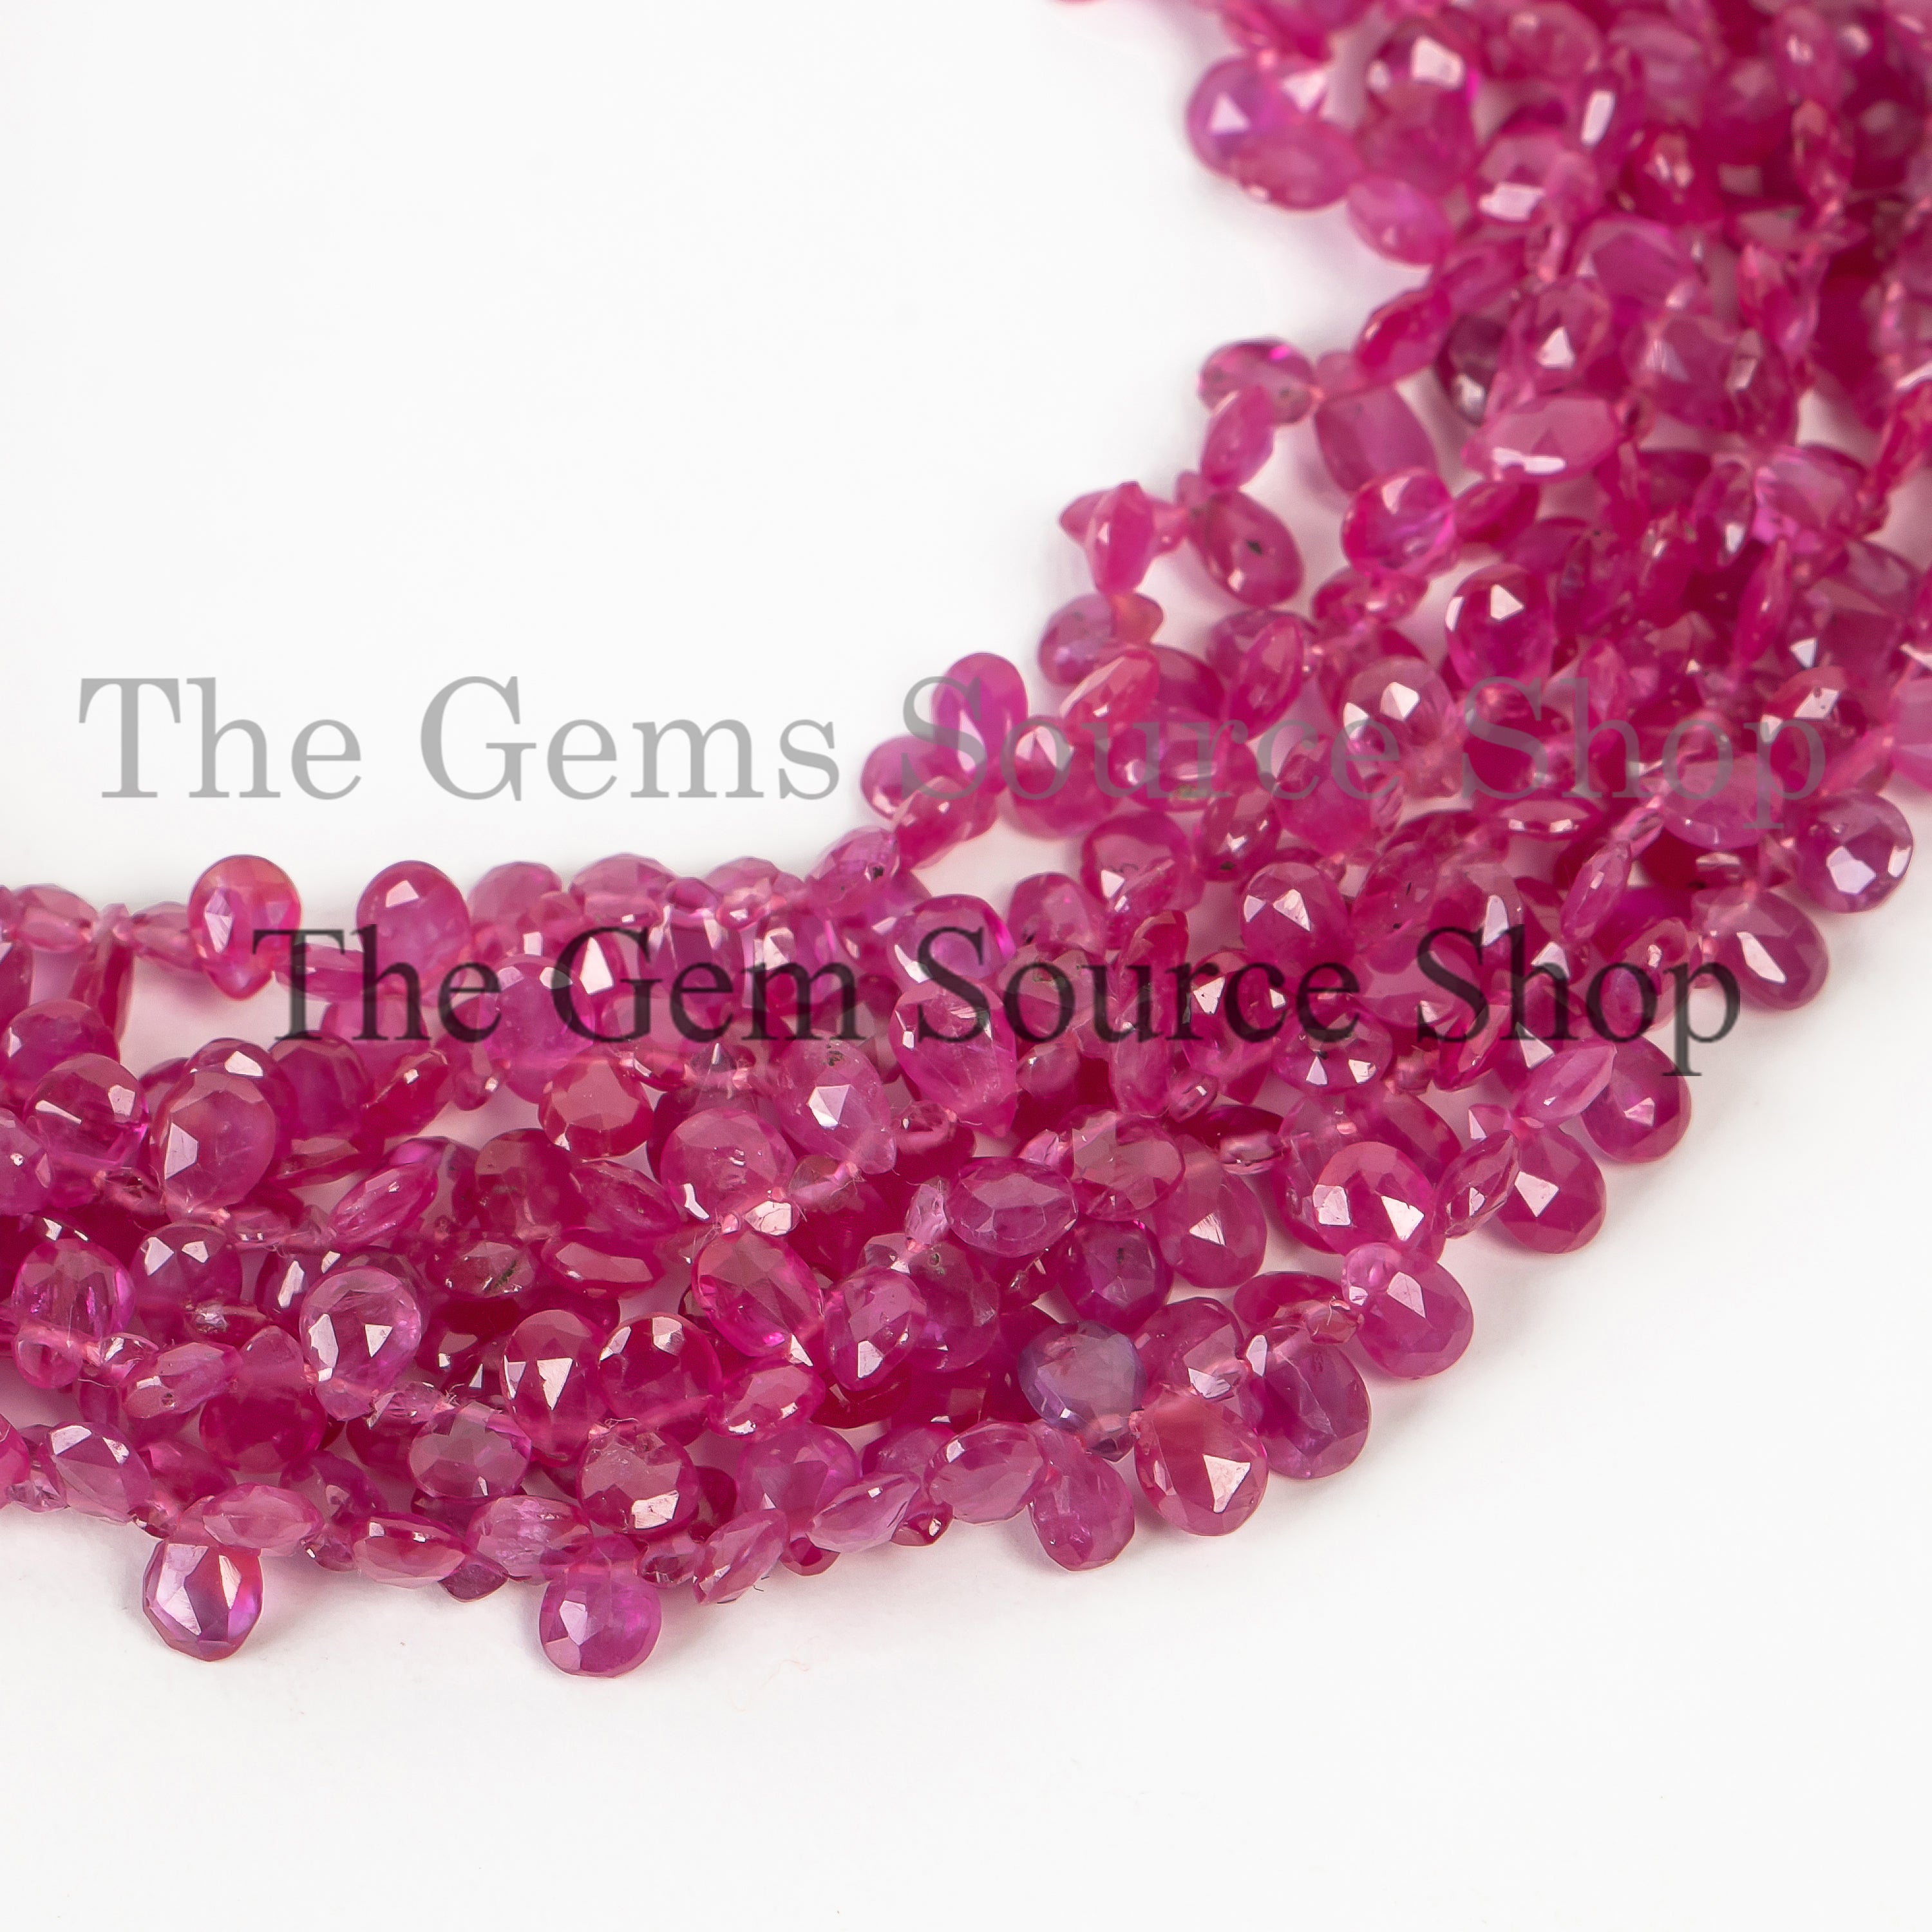 Natural Burma Ruby Faceted Pear Shape Gemstone Beads, Burma Ruby Faceted Beads, Burma Ruby Pear Shape Beads, High Quality Burma Ruby Beads